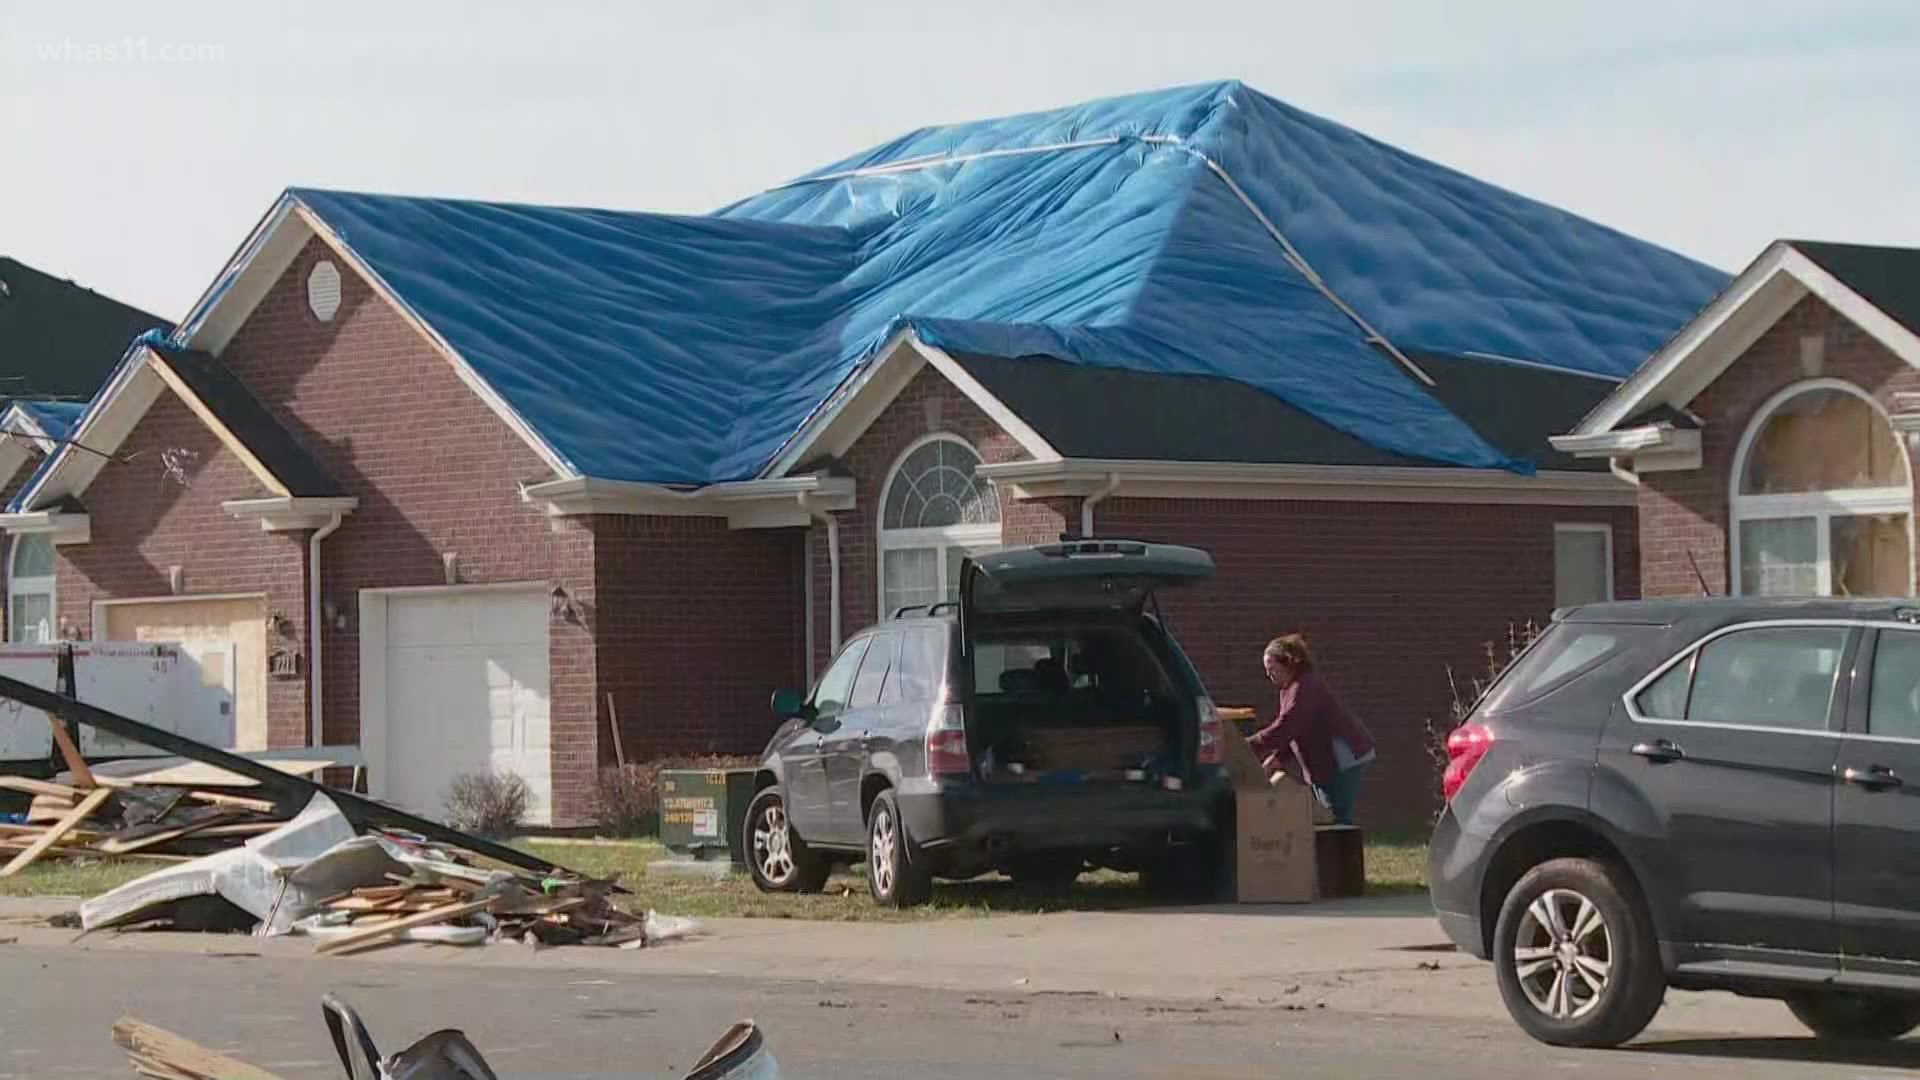 Property owners in Bowling Green race to get tarp on roofs of tornado damaged homes as the potential for lots of rain in the forecast.